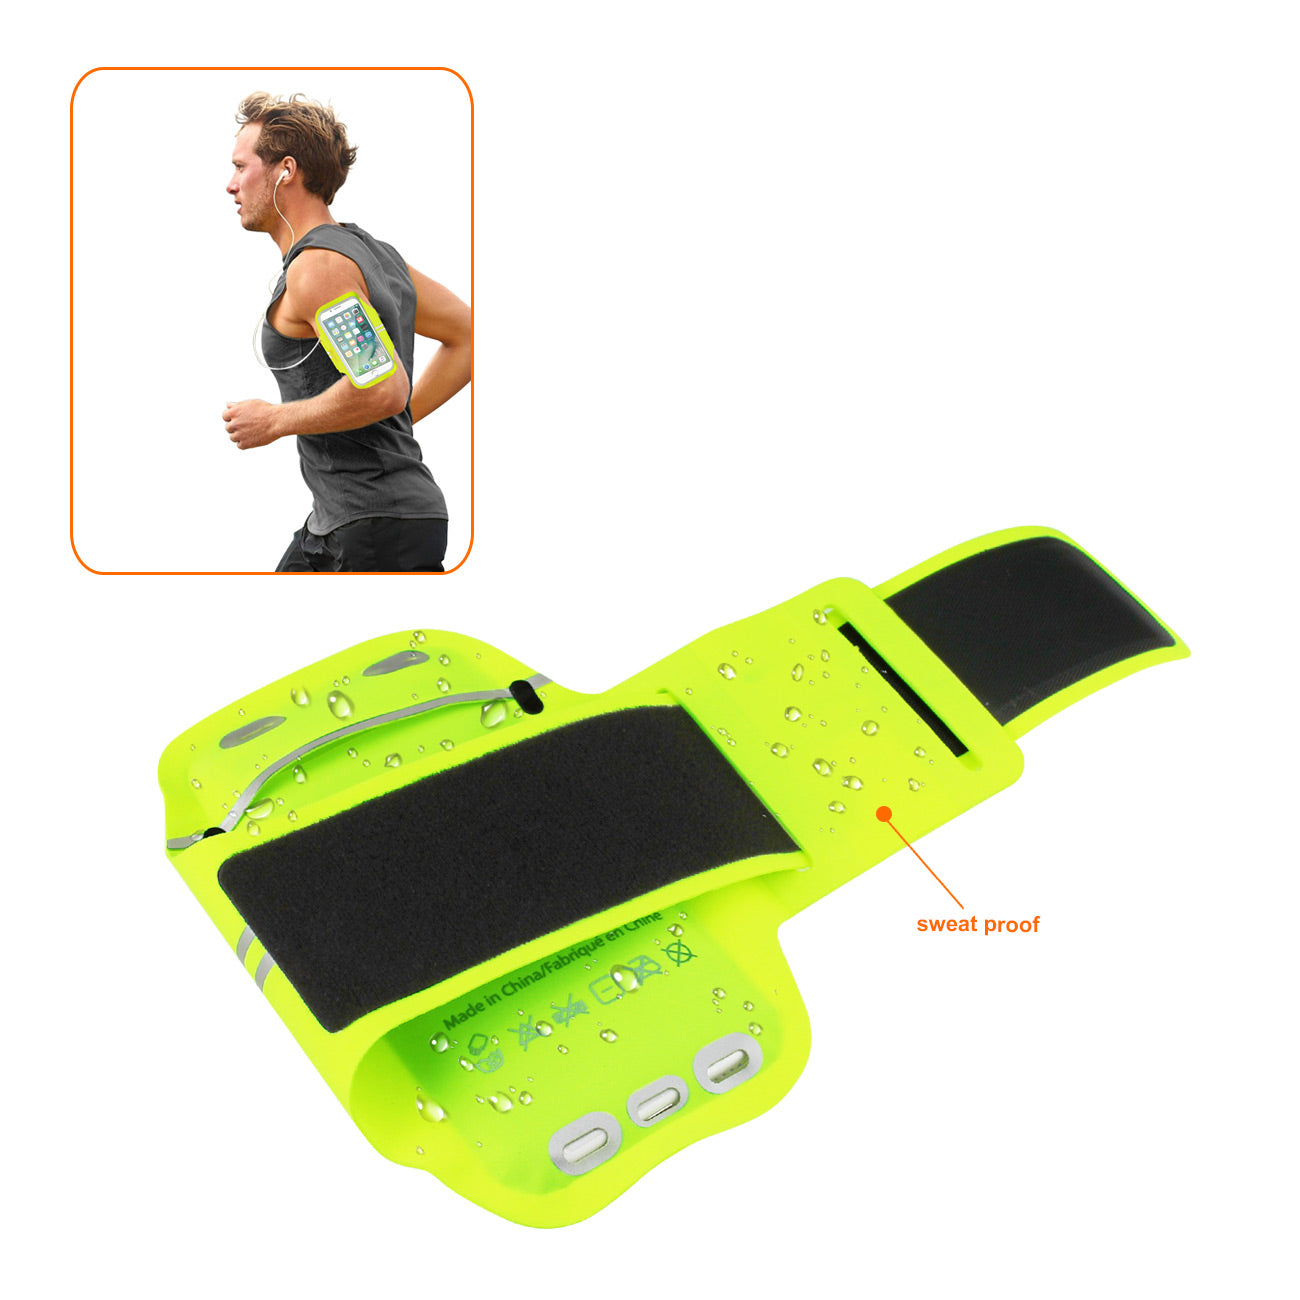 Reiko Running Sports Armband With Touch Screen 5X3X0.5 Inches Device In Green